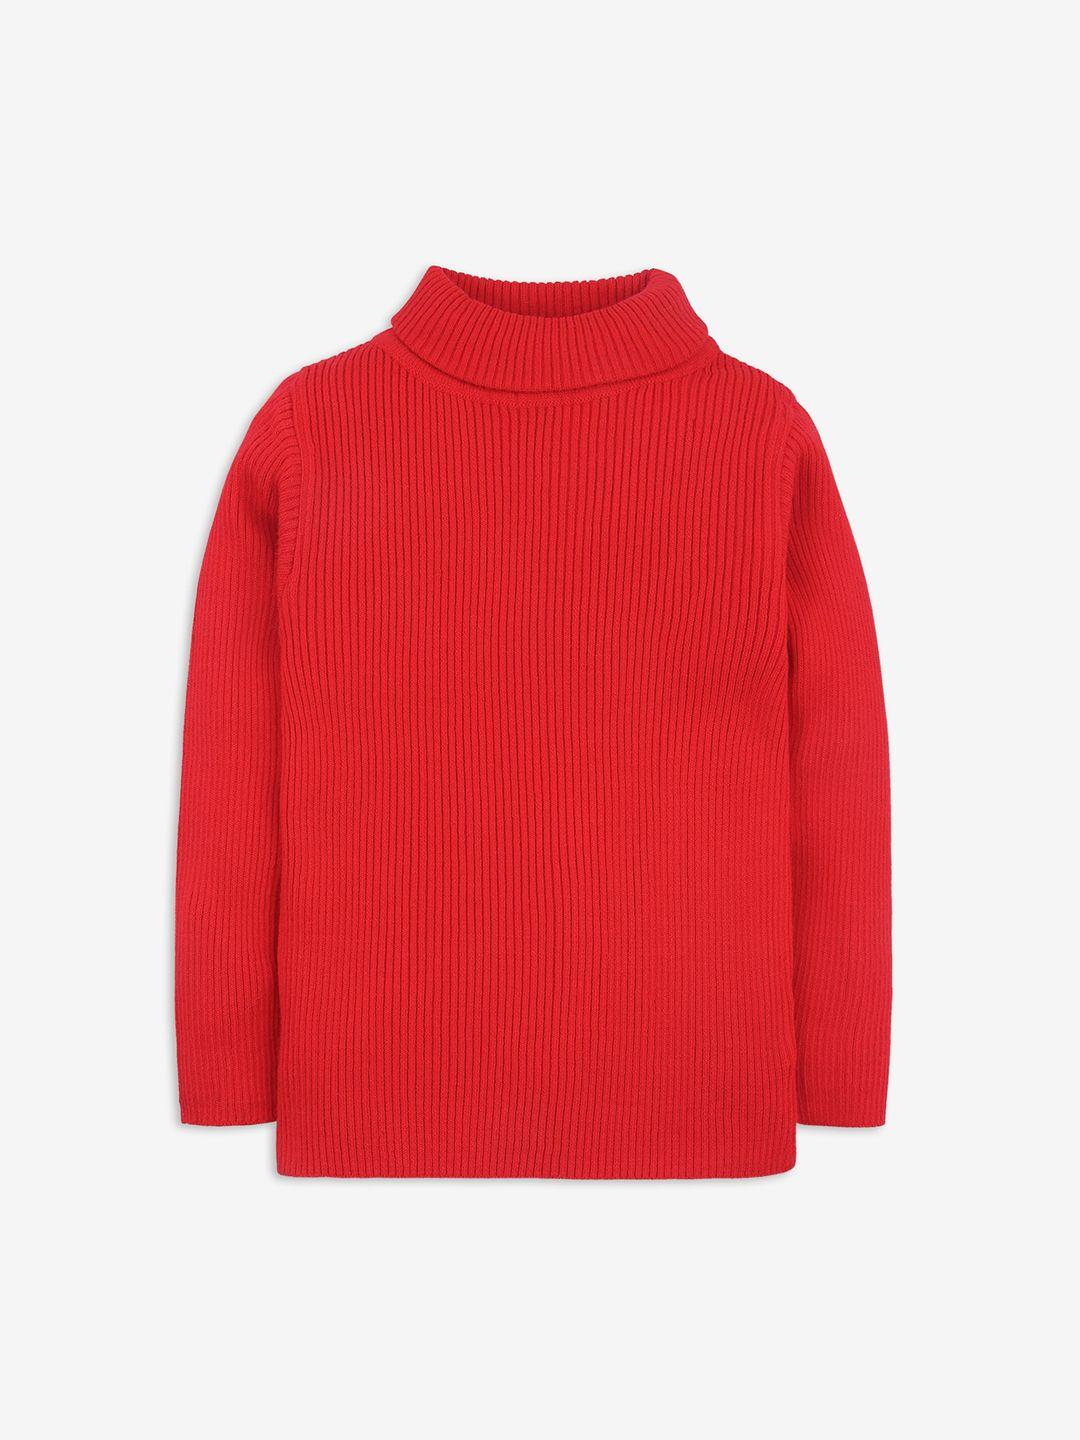 rvk kids red ribbed pullover sweater